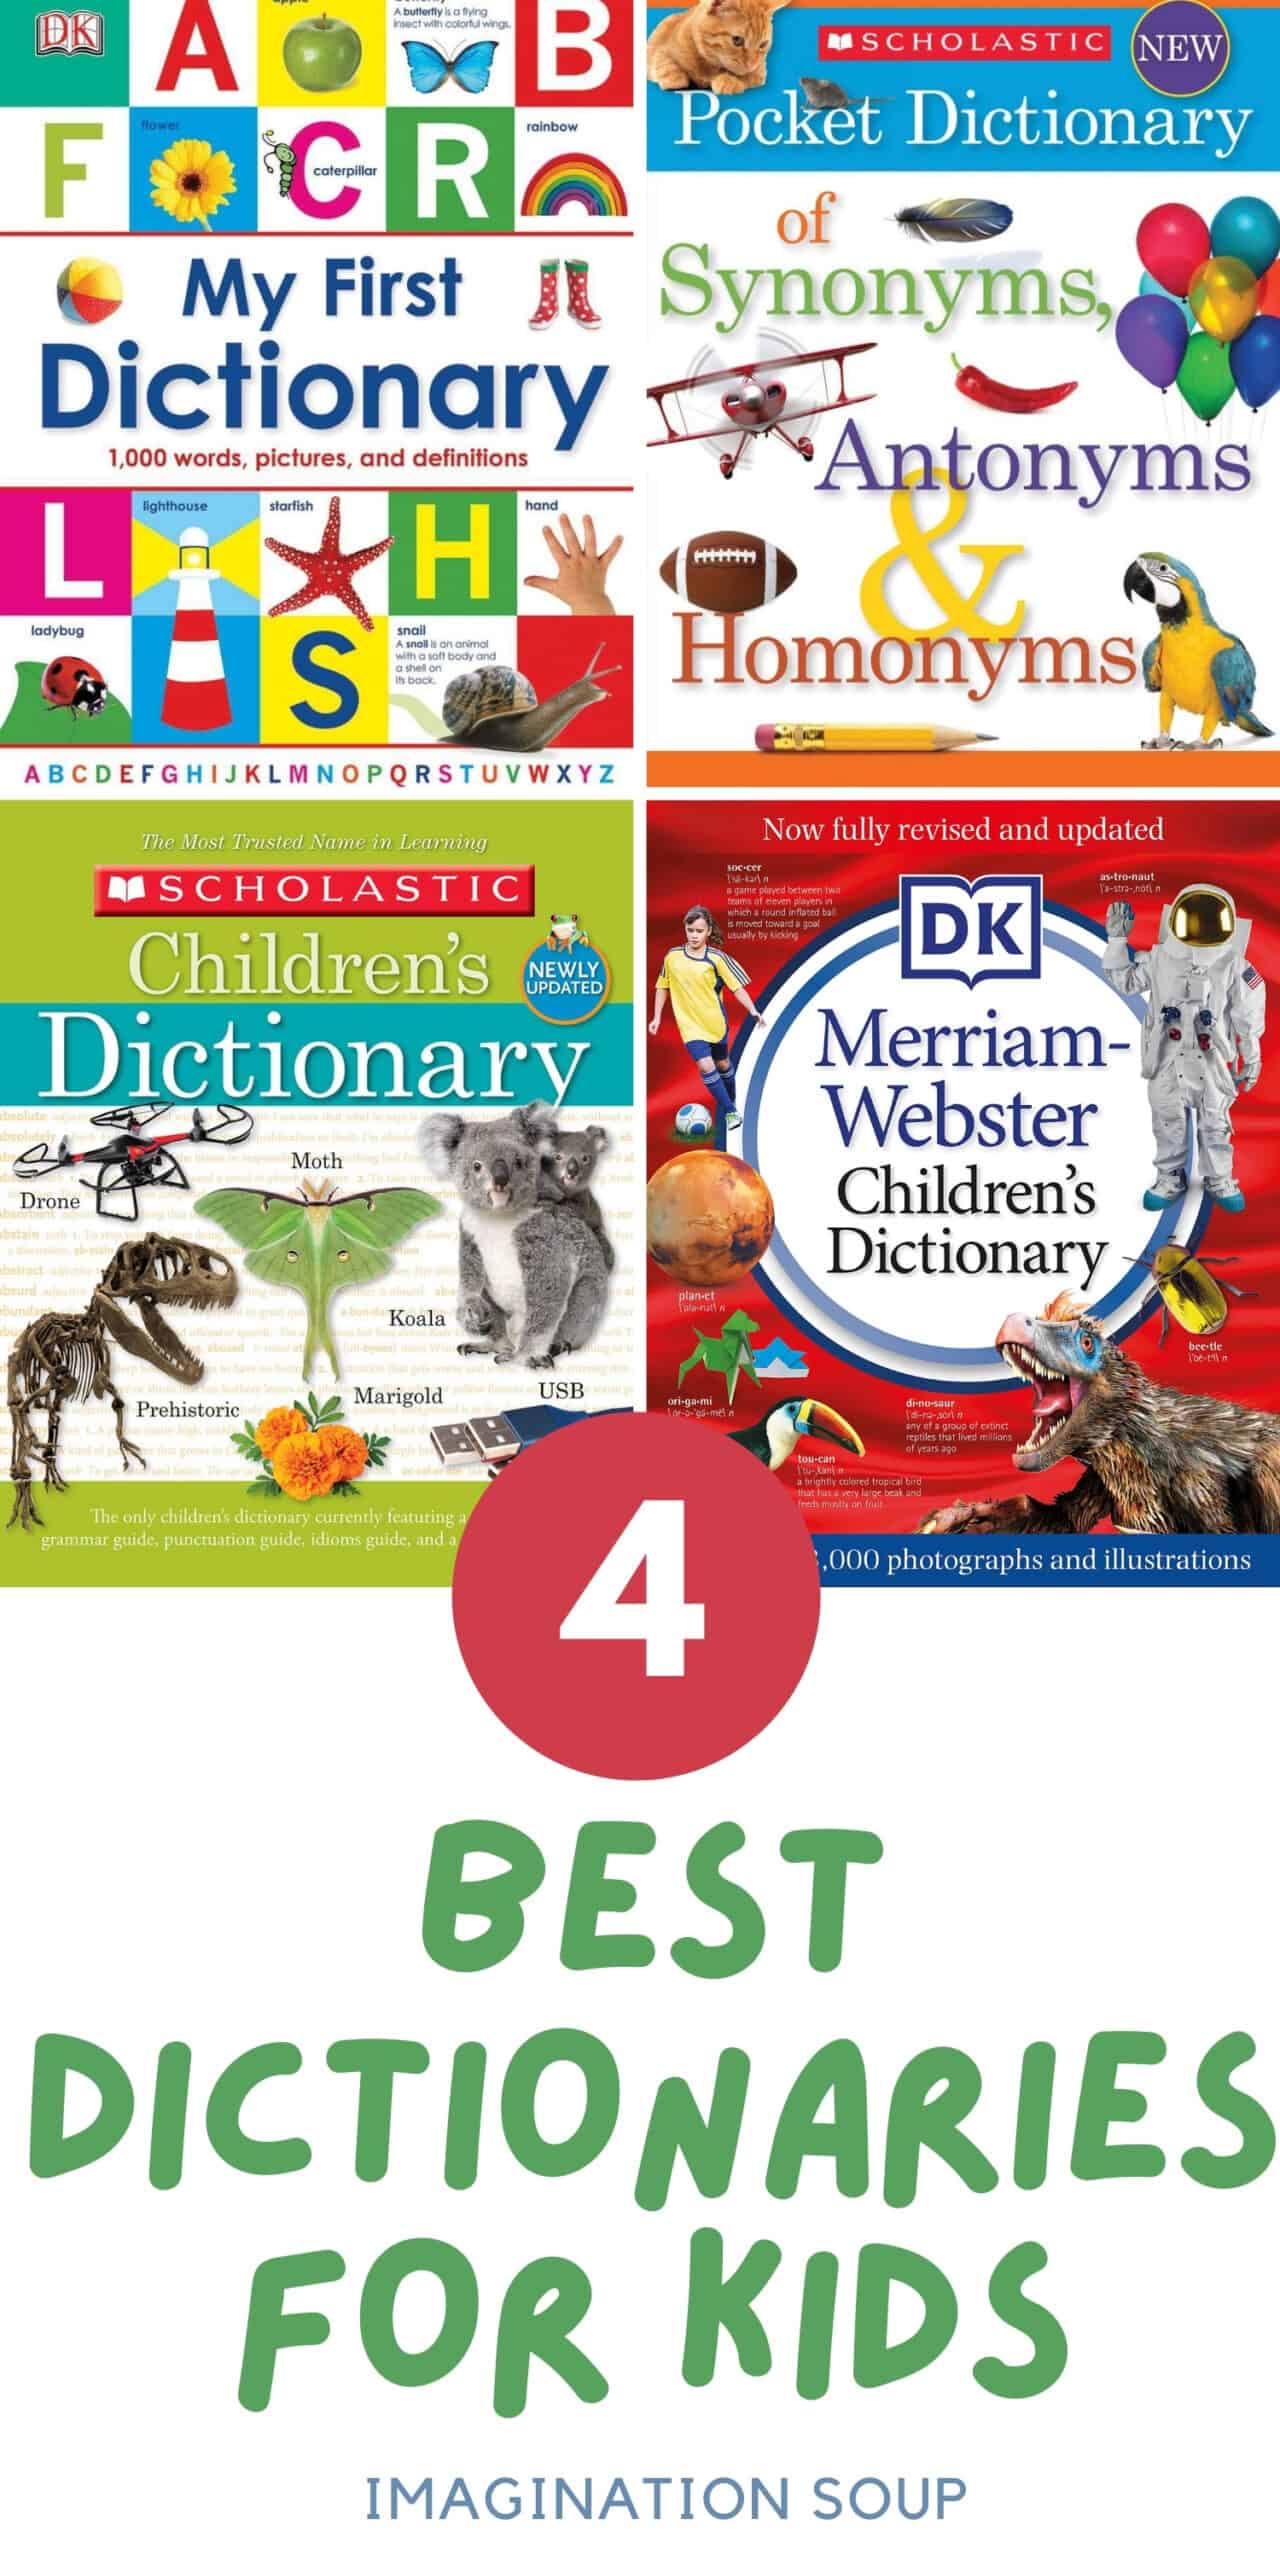 BEST dictionary for kids